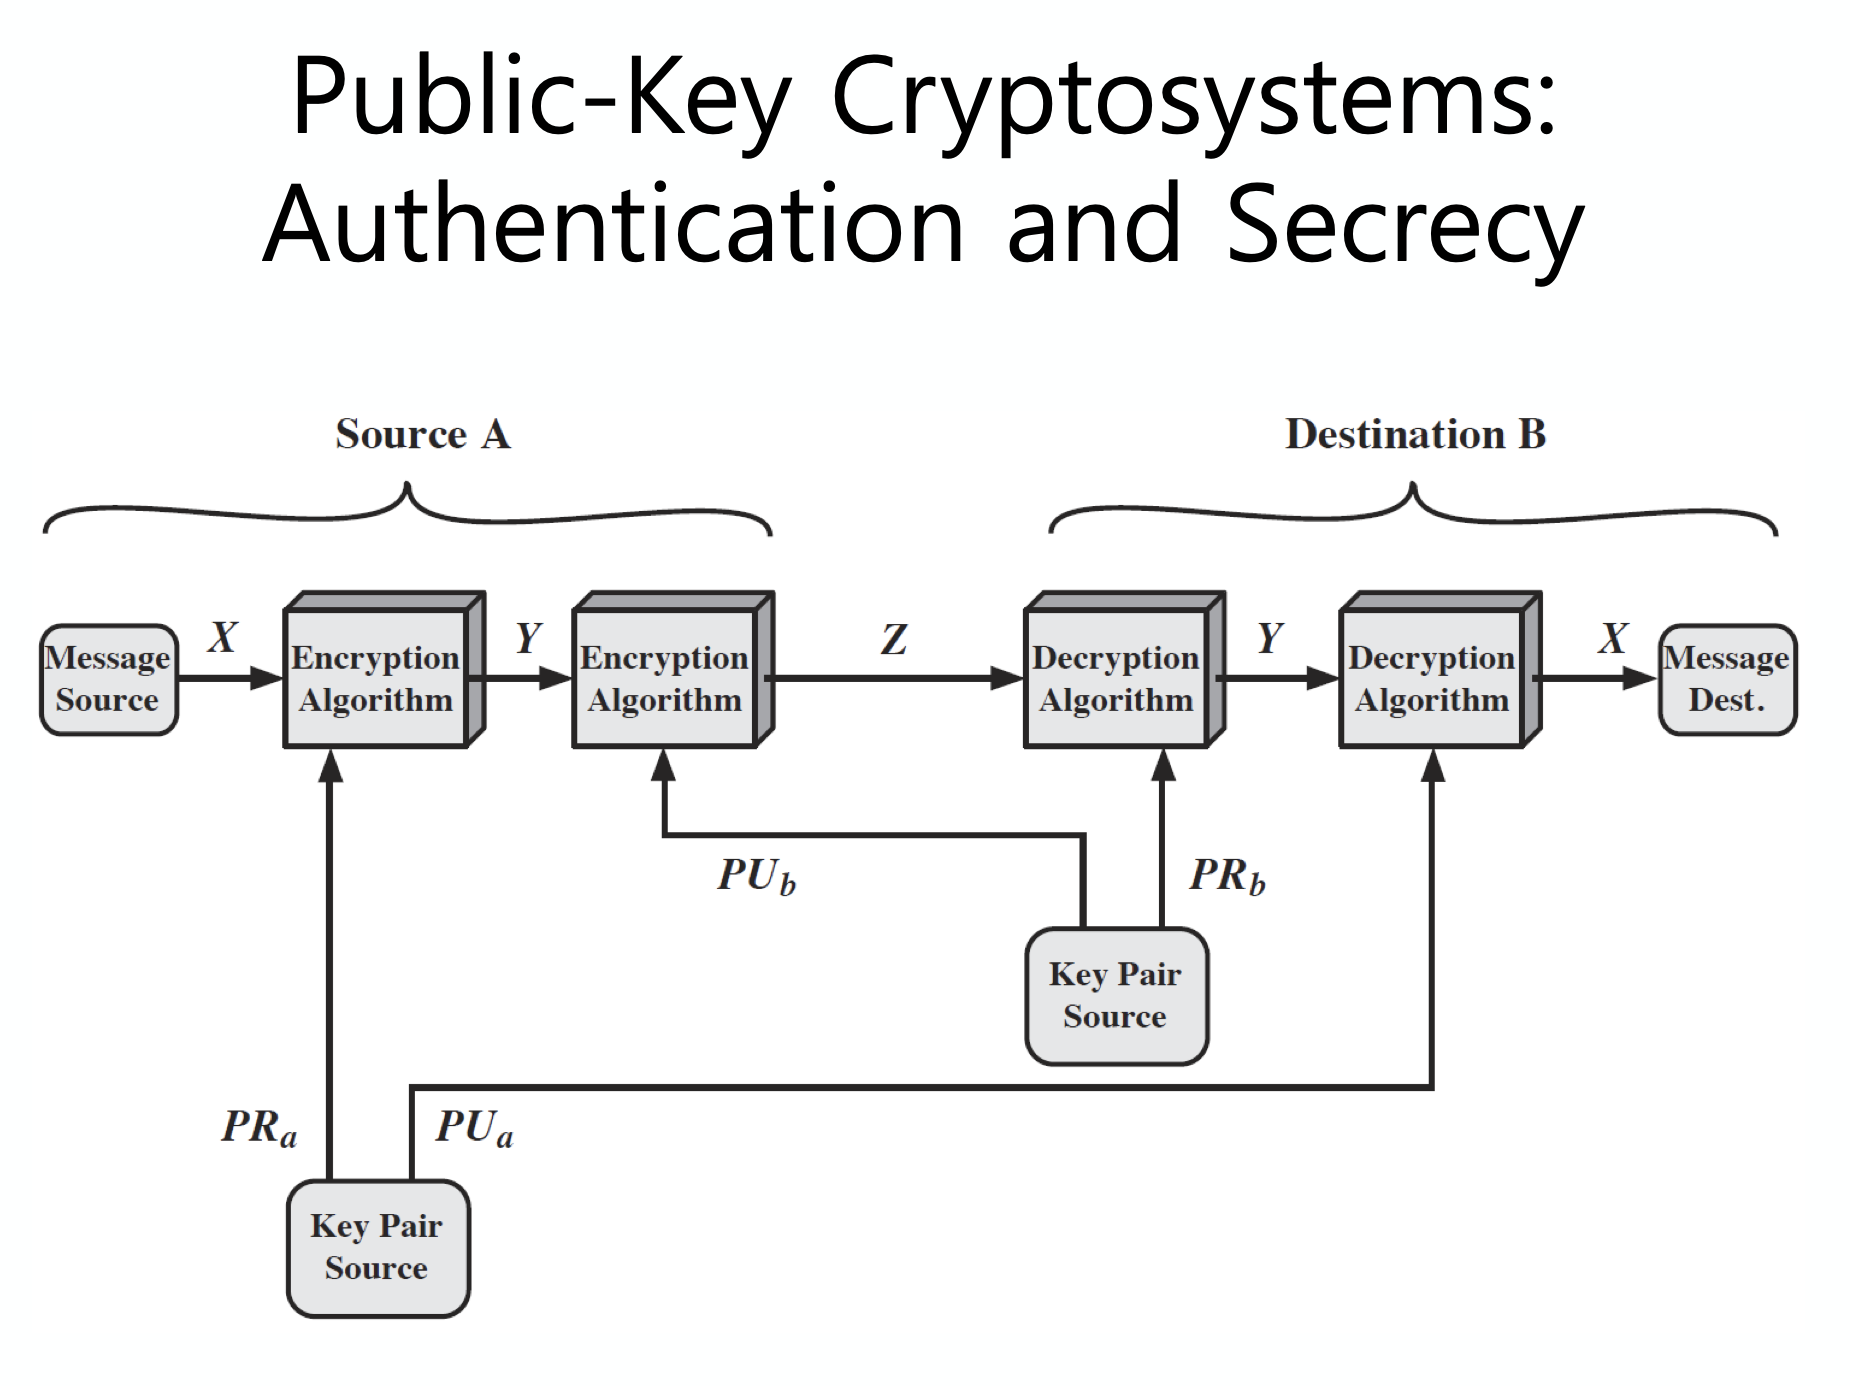 authentication and secrecy